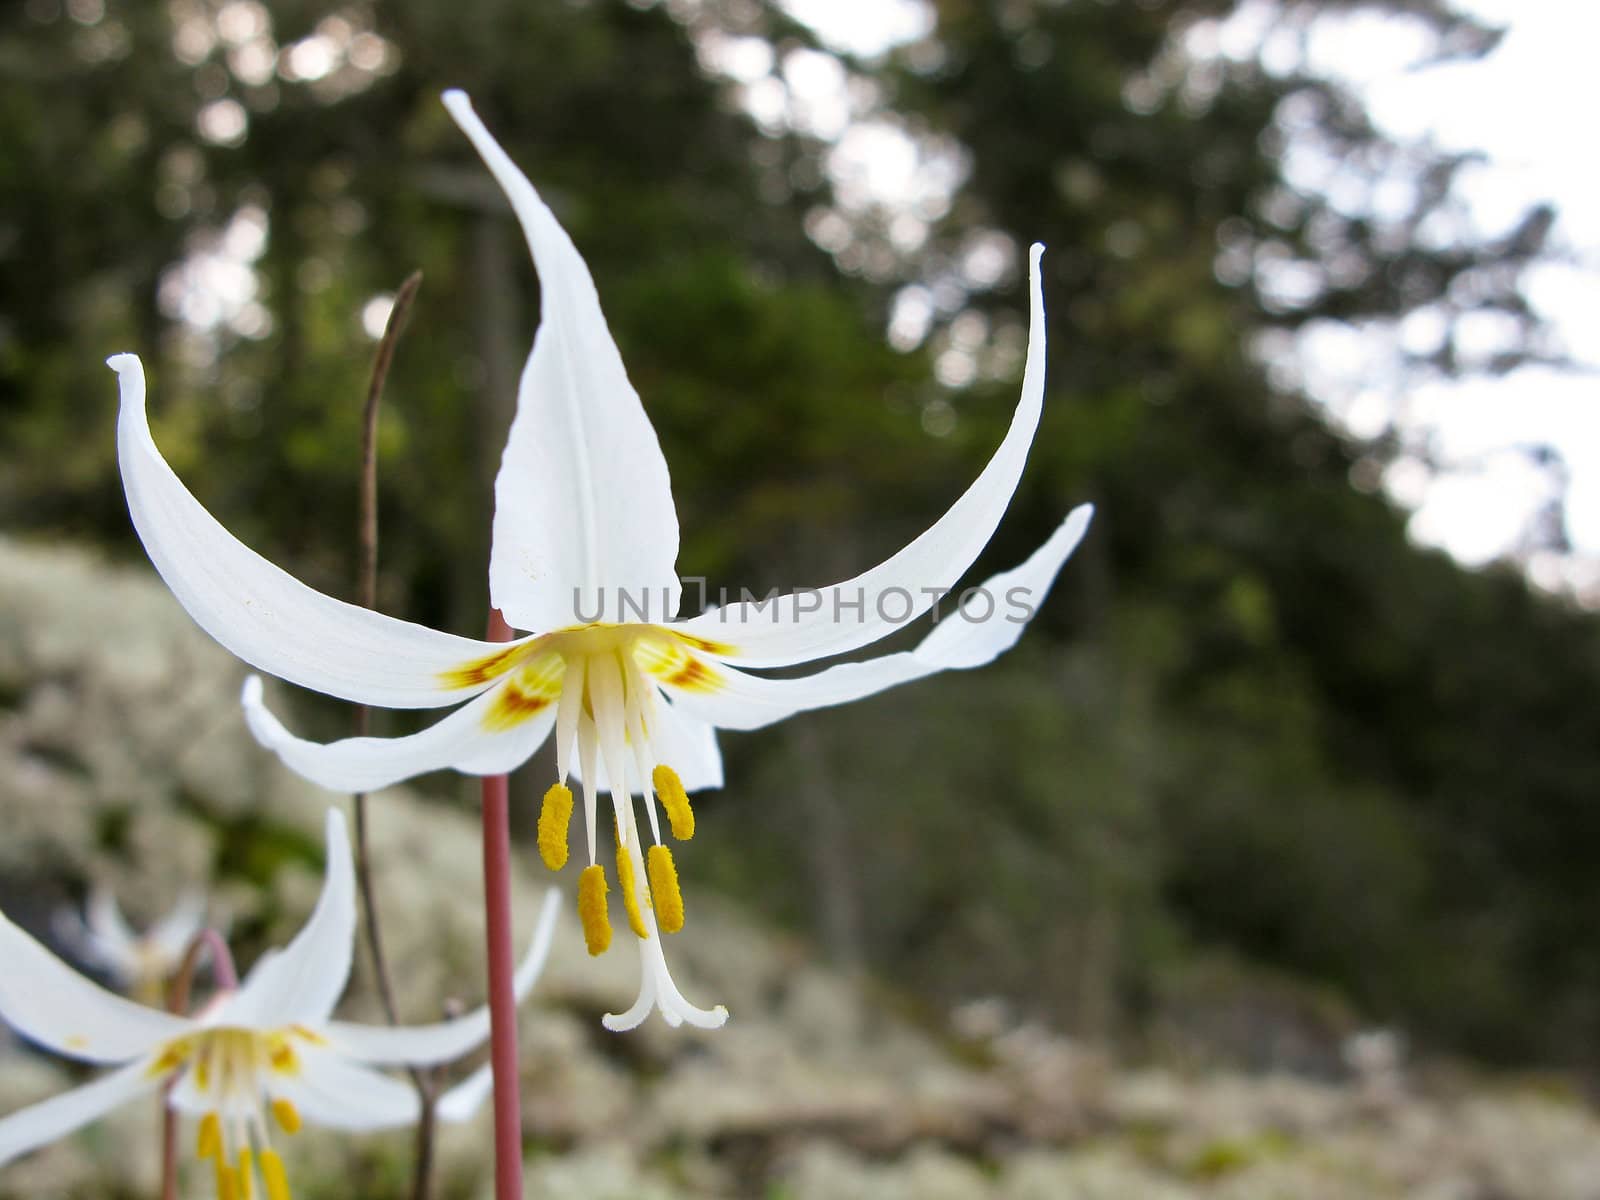 Erythronium, fawn-lily, trout-lily, dog's-tooth violet, adder's-tongue on forest floor